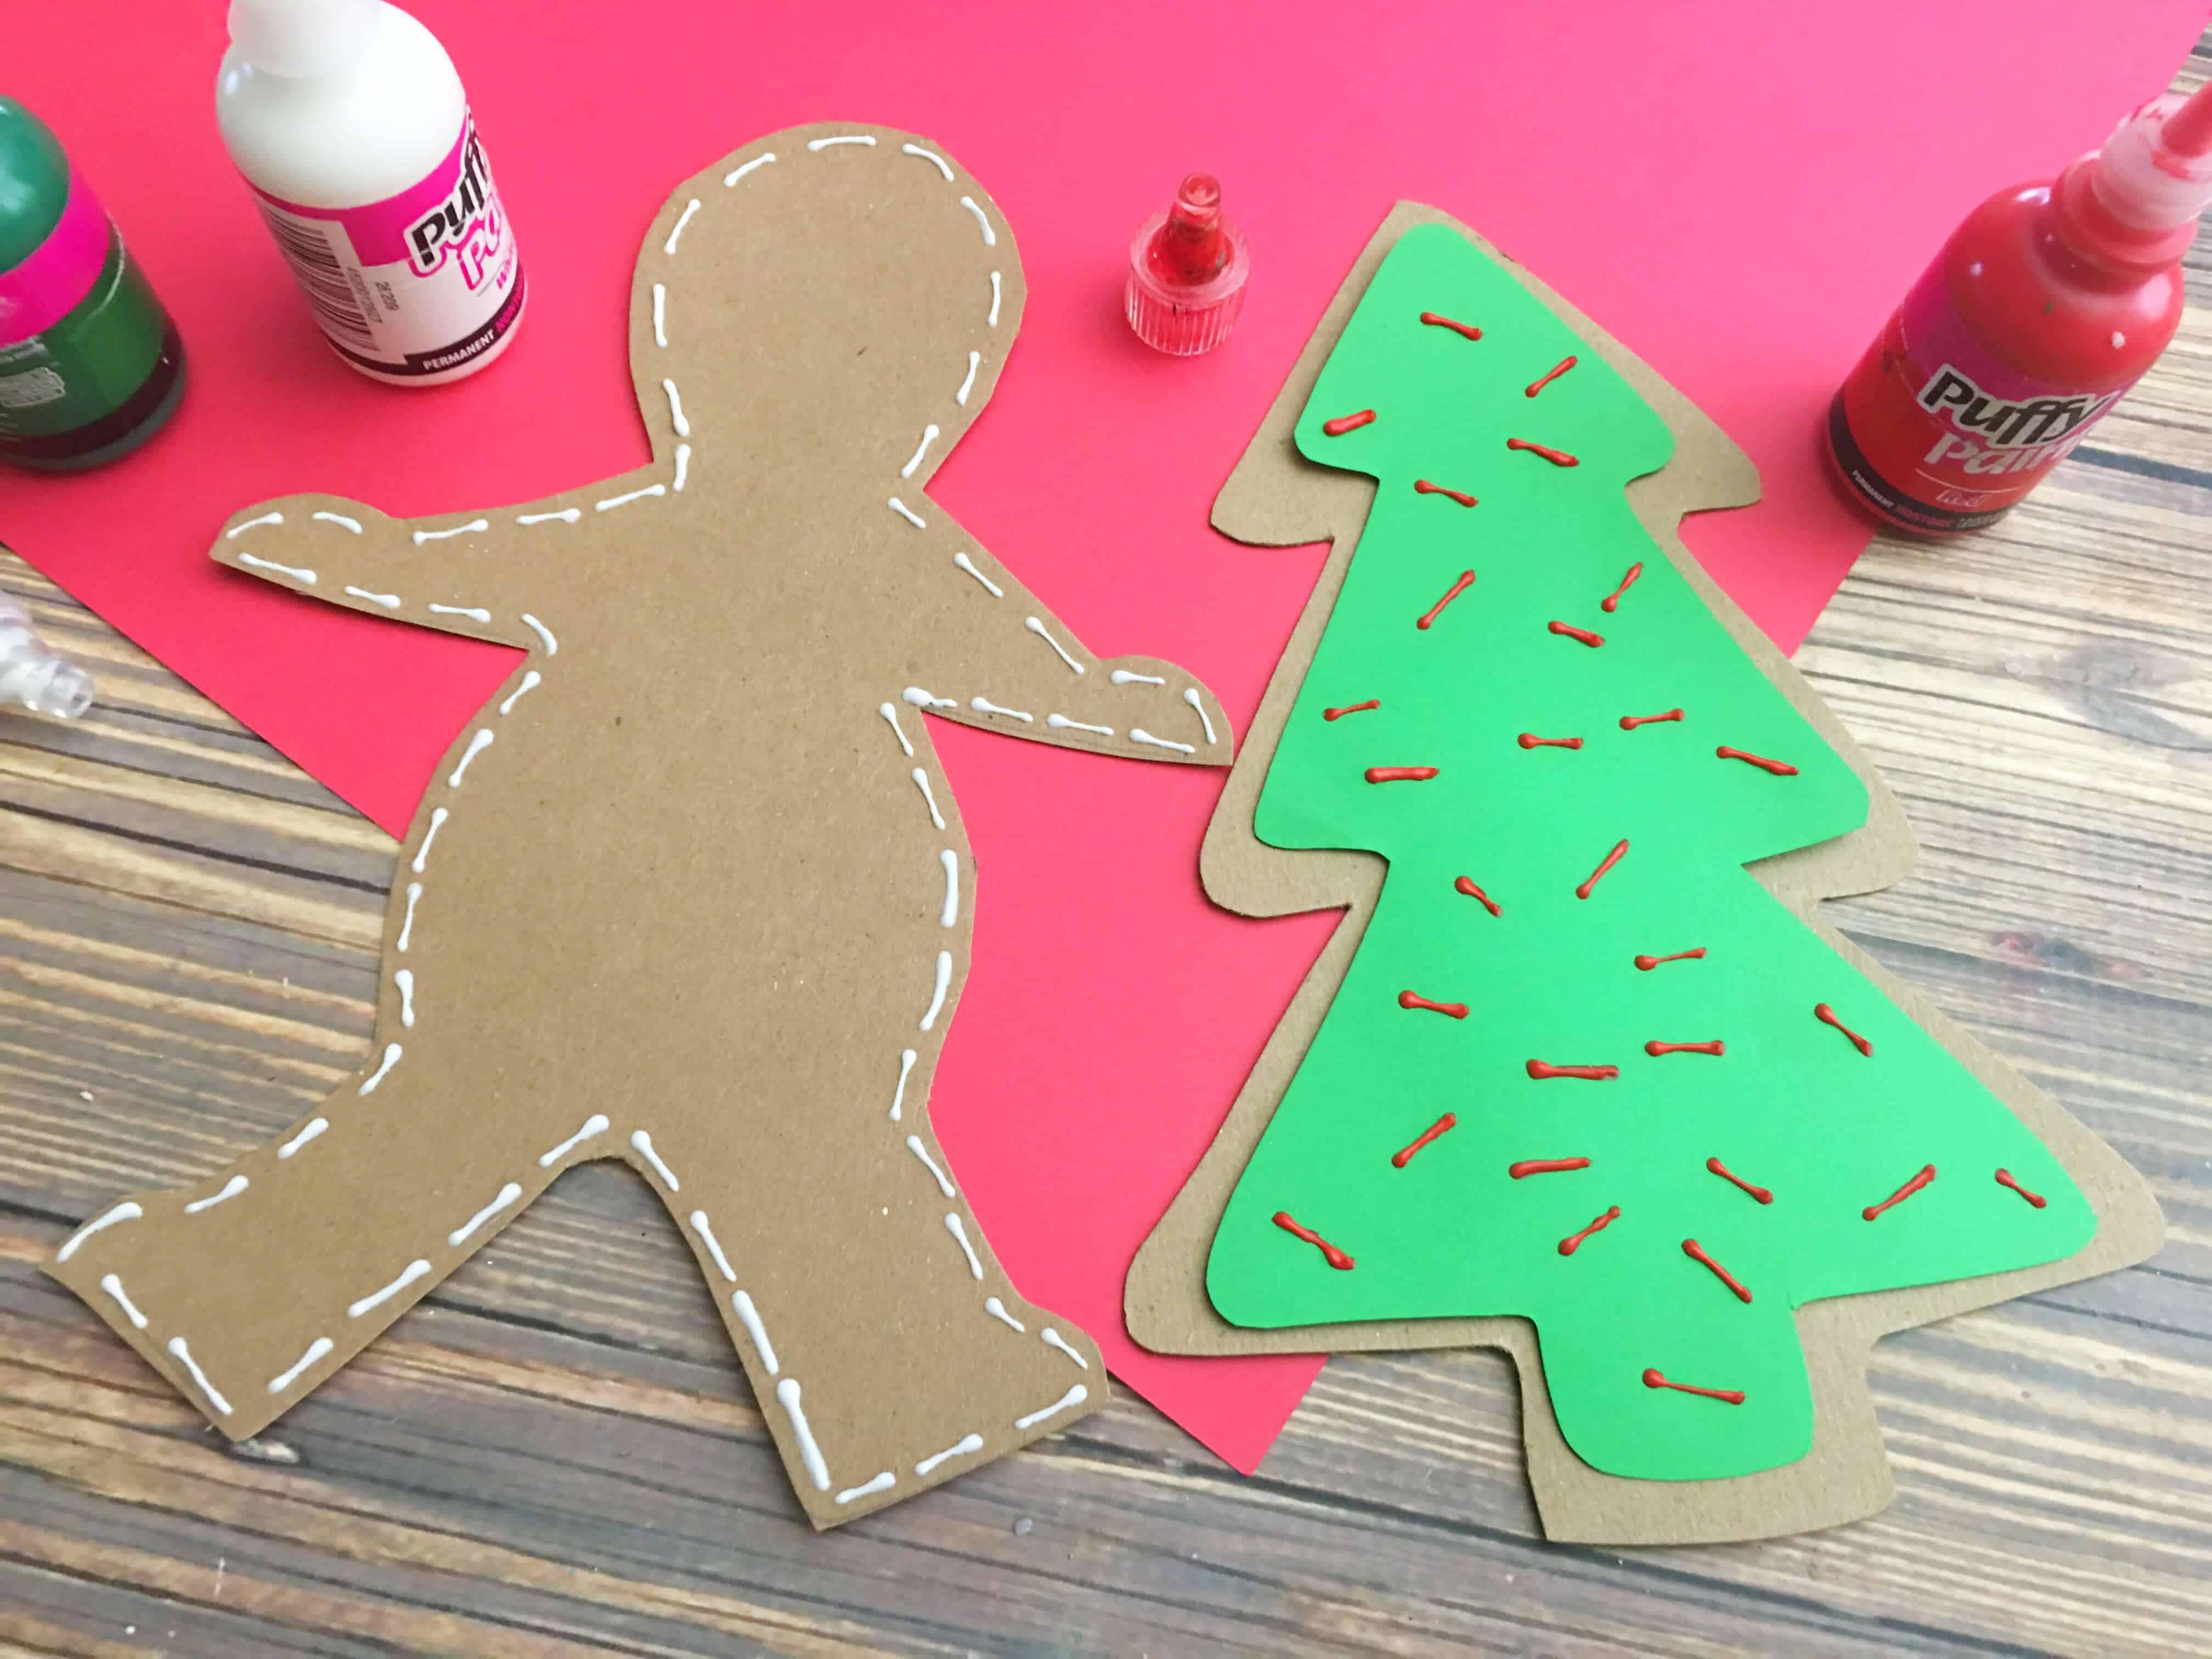 Cute, easy and fun paper gingerbread craft that you can make after reading a Gingerbread man book. Great craft for preschool or kindergarten.